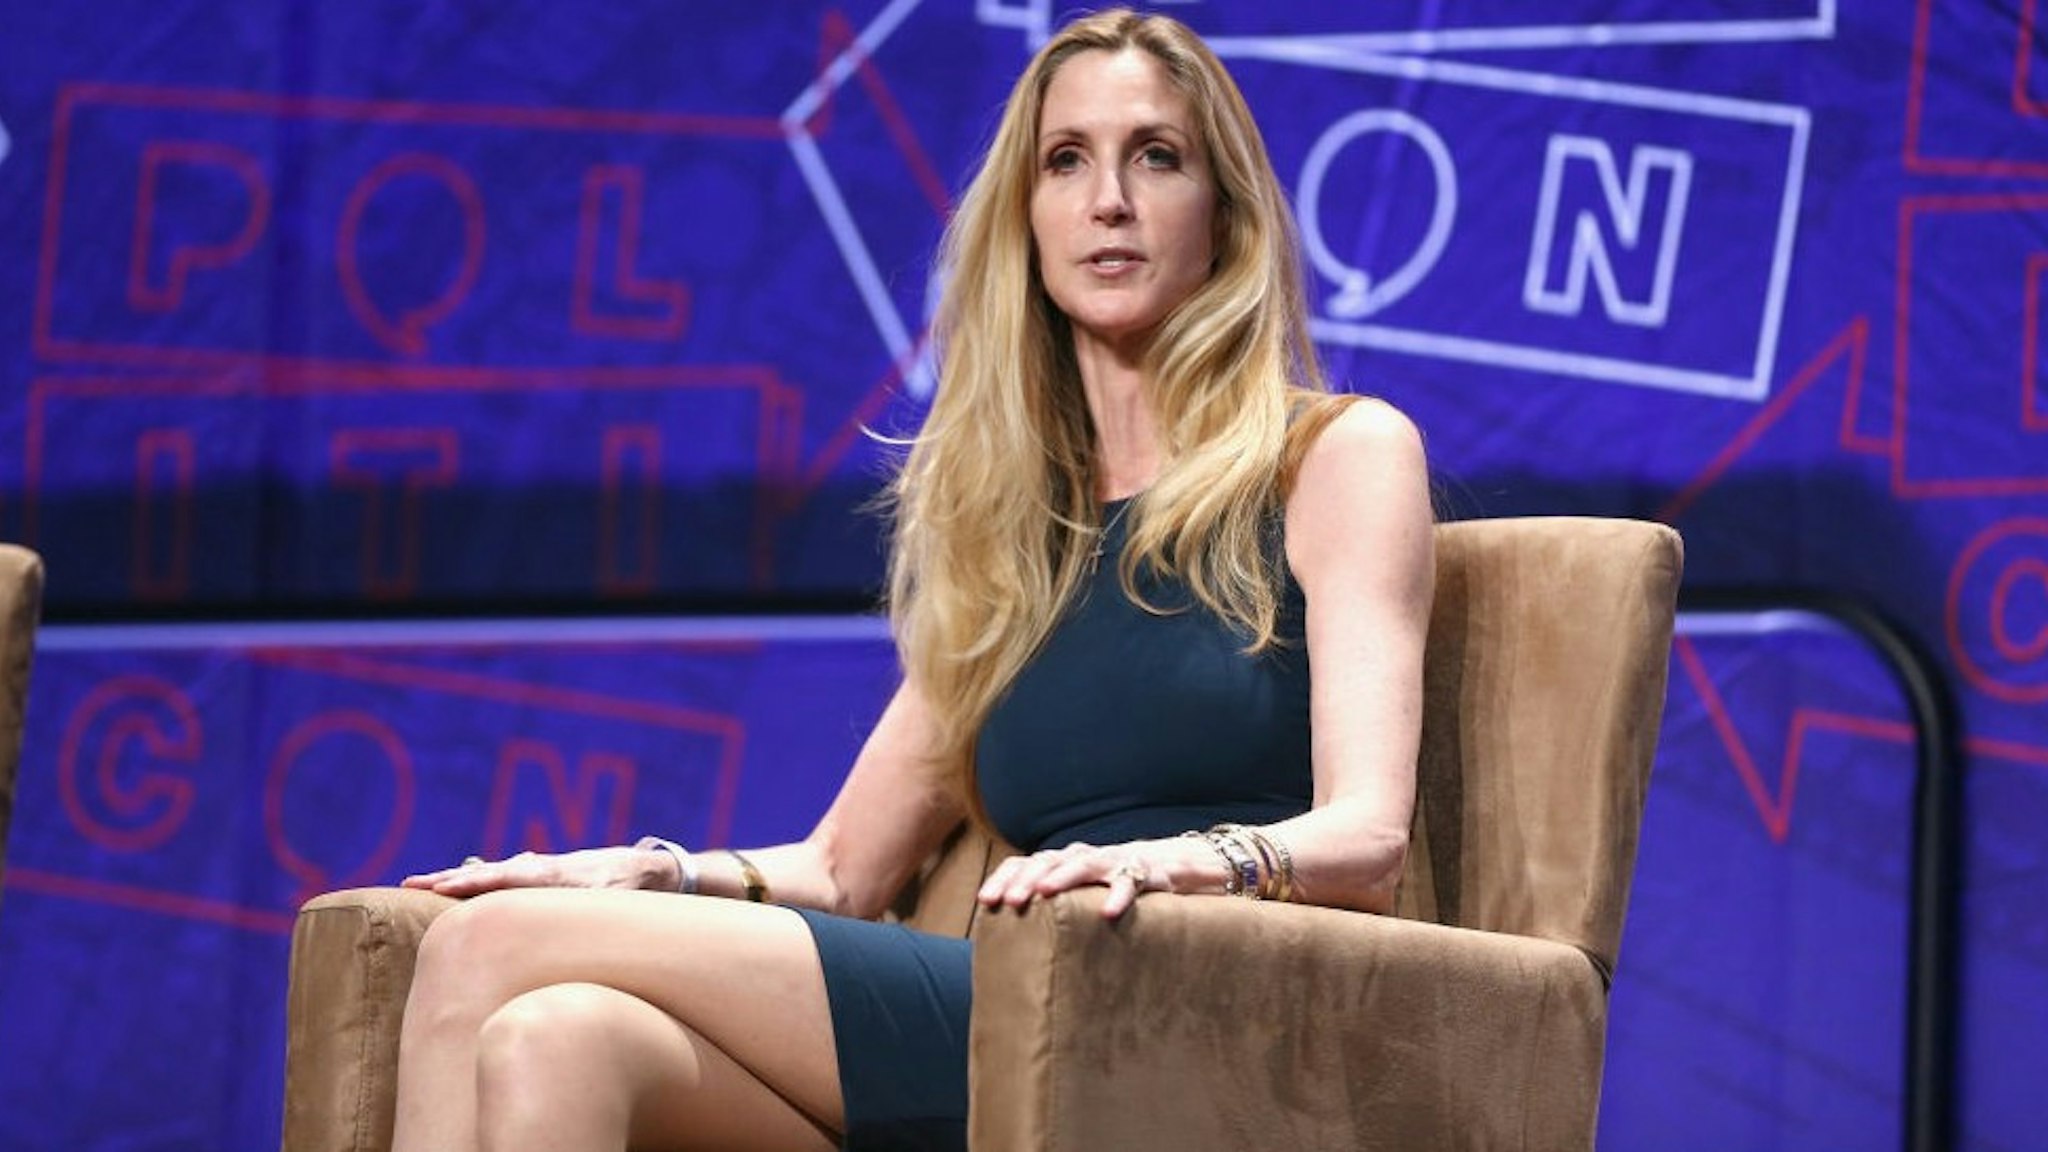 LOS ANGELES, CA - OCTOBER 20: Ann Coulter speaks onstage during Politicon 2018 at Los Angeles Convention Center on October 20, 2018 in Los Angeles, California. (Photo by